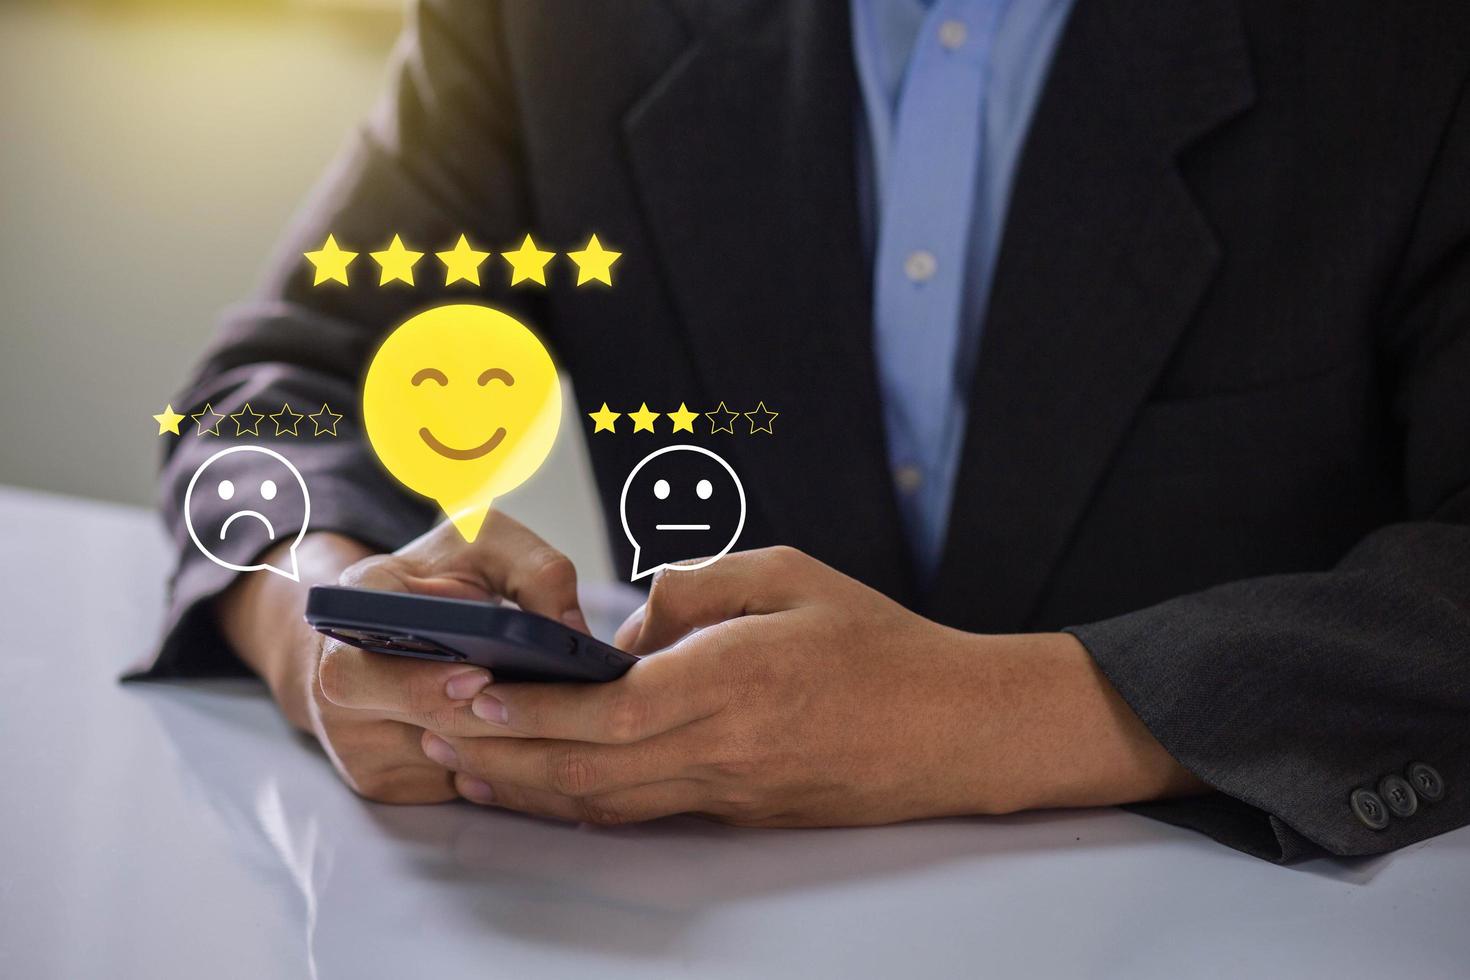 Customer services best excellent business rating experience online. User giving 5-star for satisfaction survey evaluation product service quality, satisfaction feedback review, good quality. photo